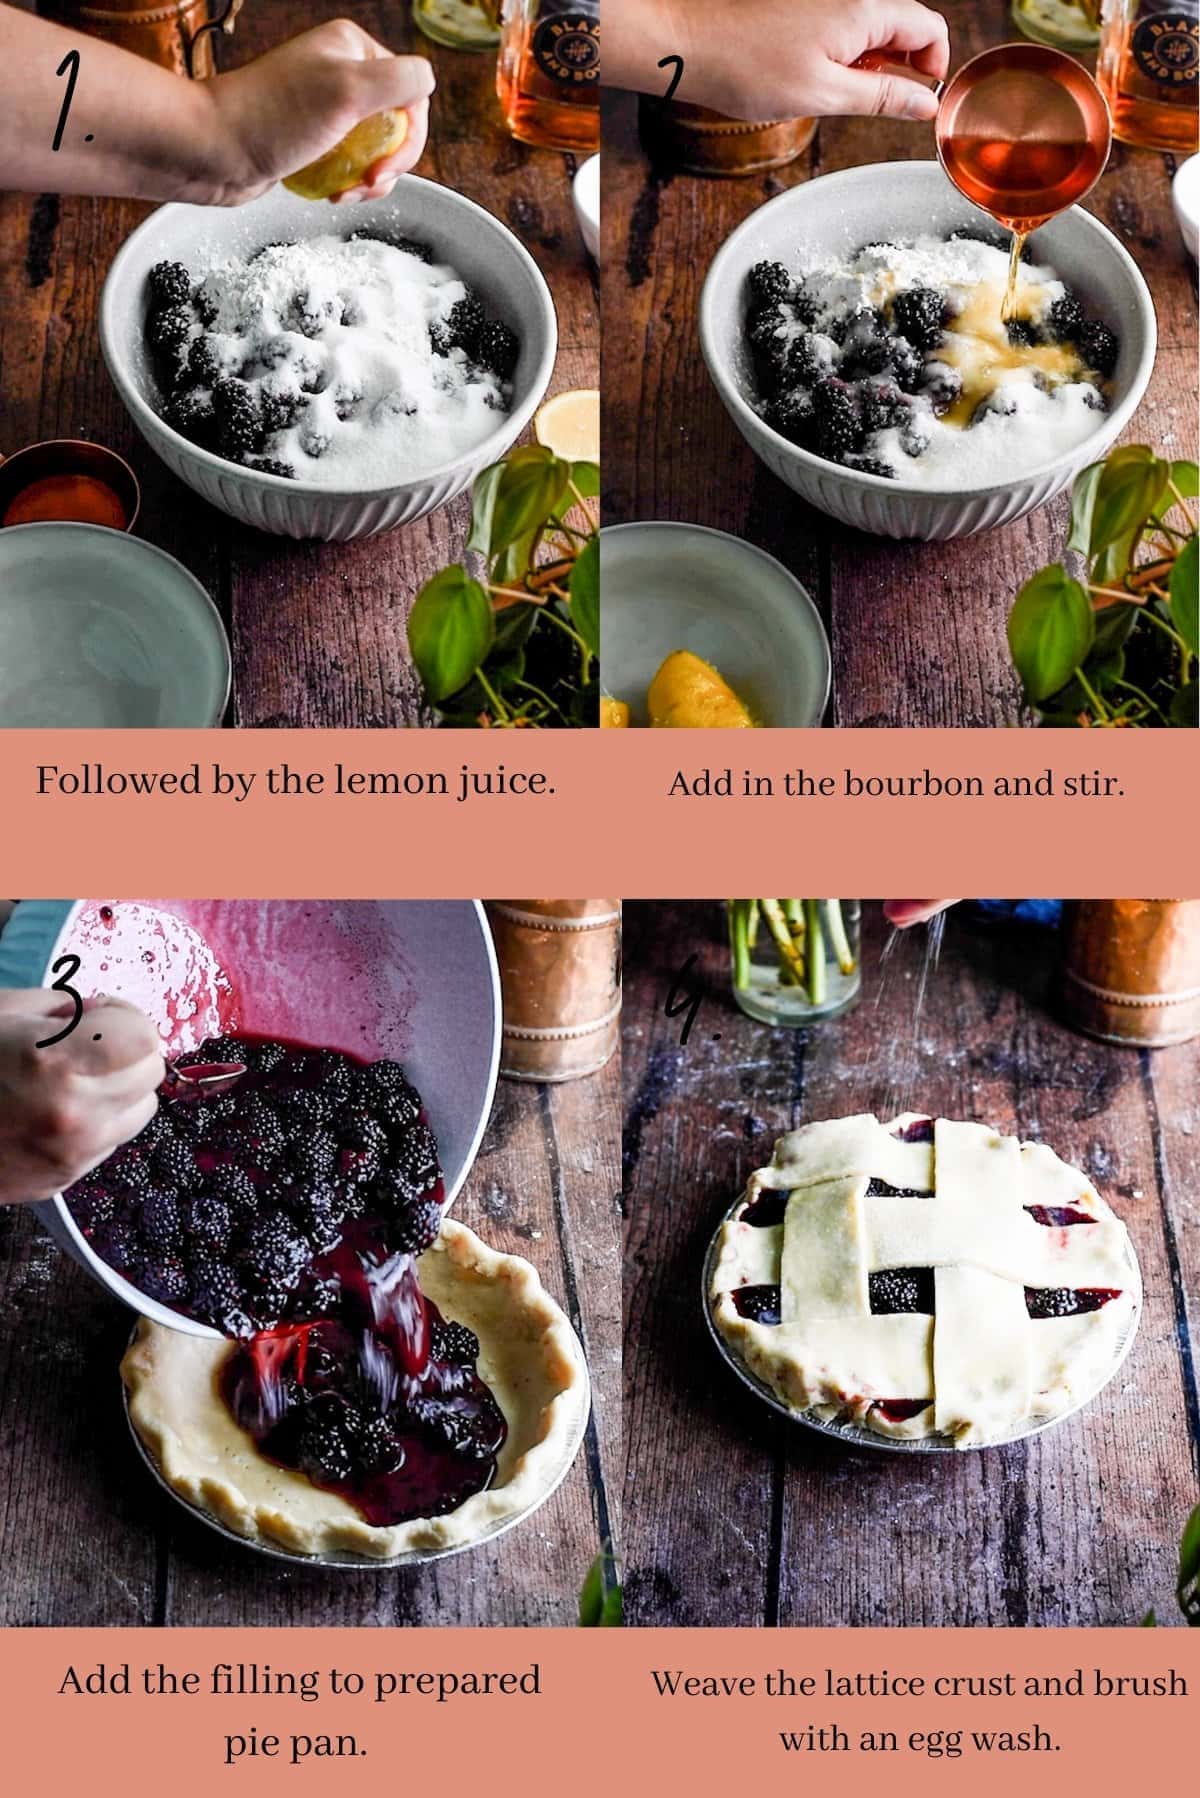 Step by step instructions showing making the blackberry filling and lattice crust. 